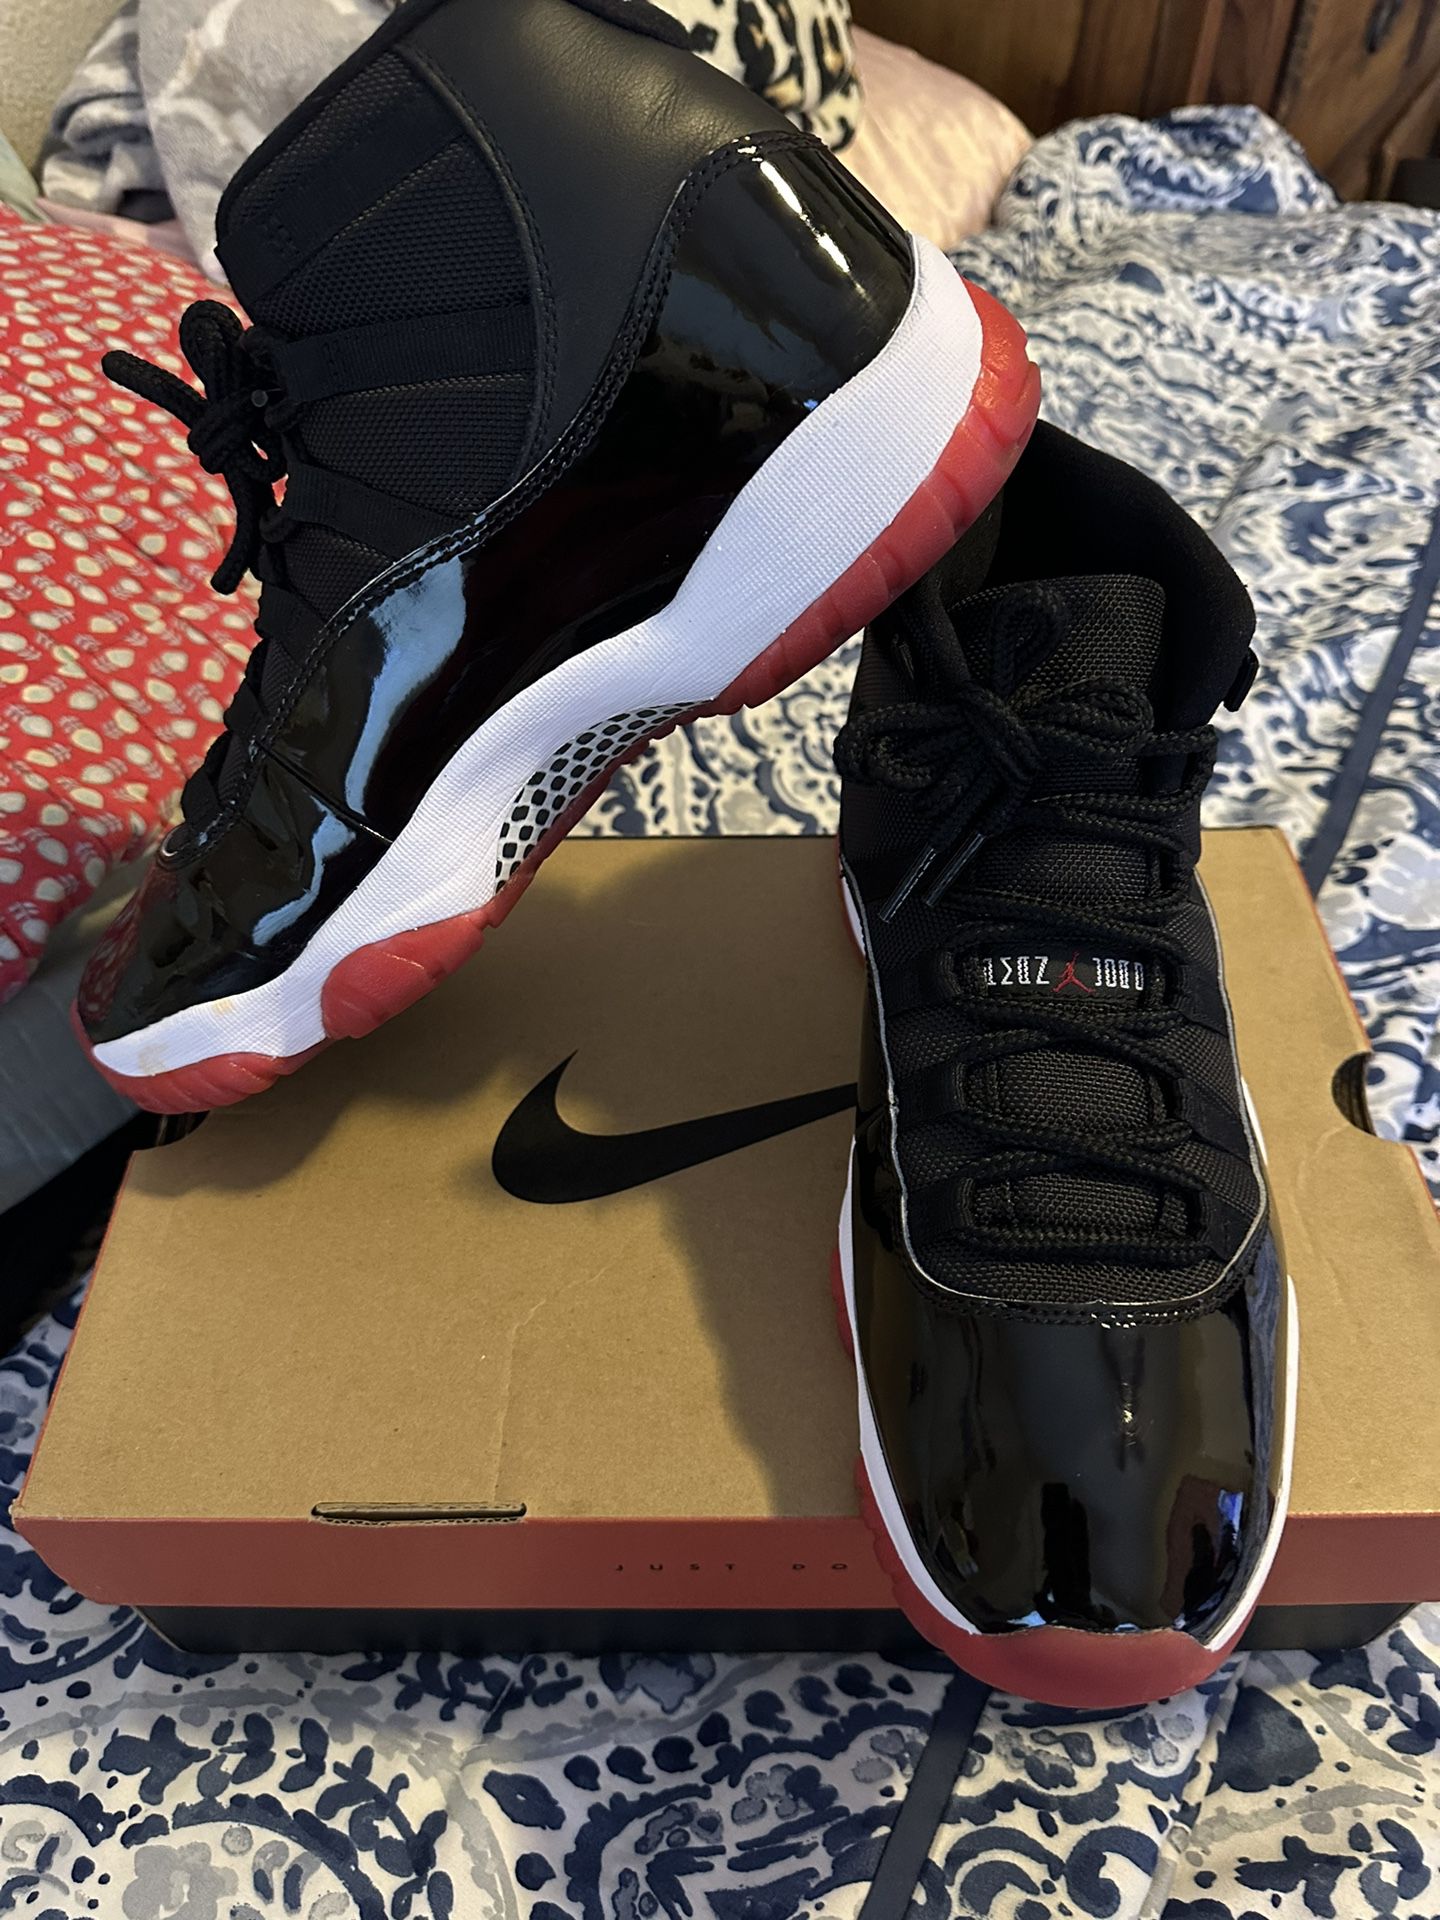 $275 Today Only Size 10.5 Air Jordan 11 BREADS